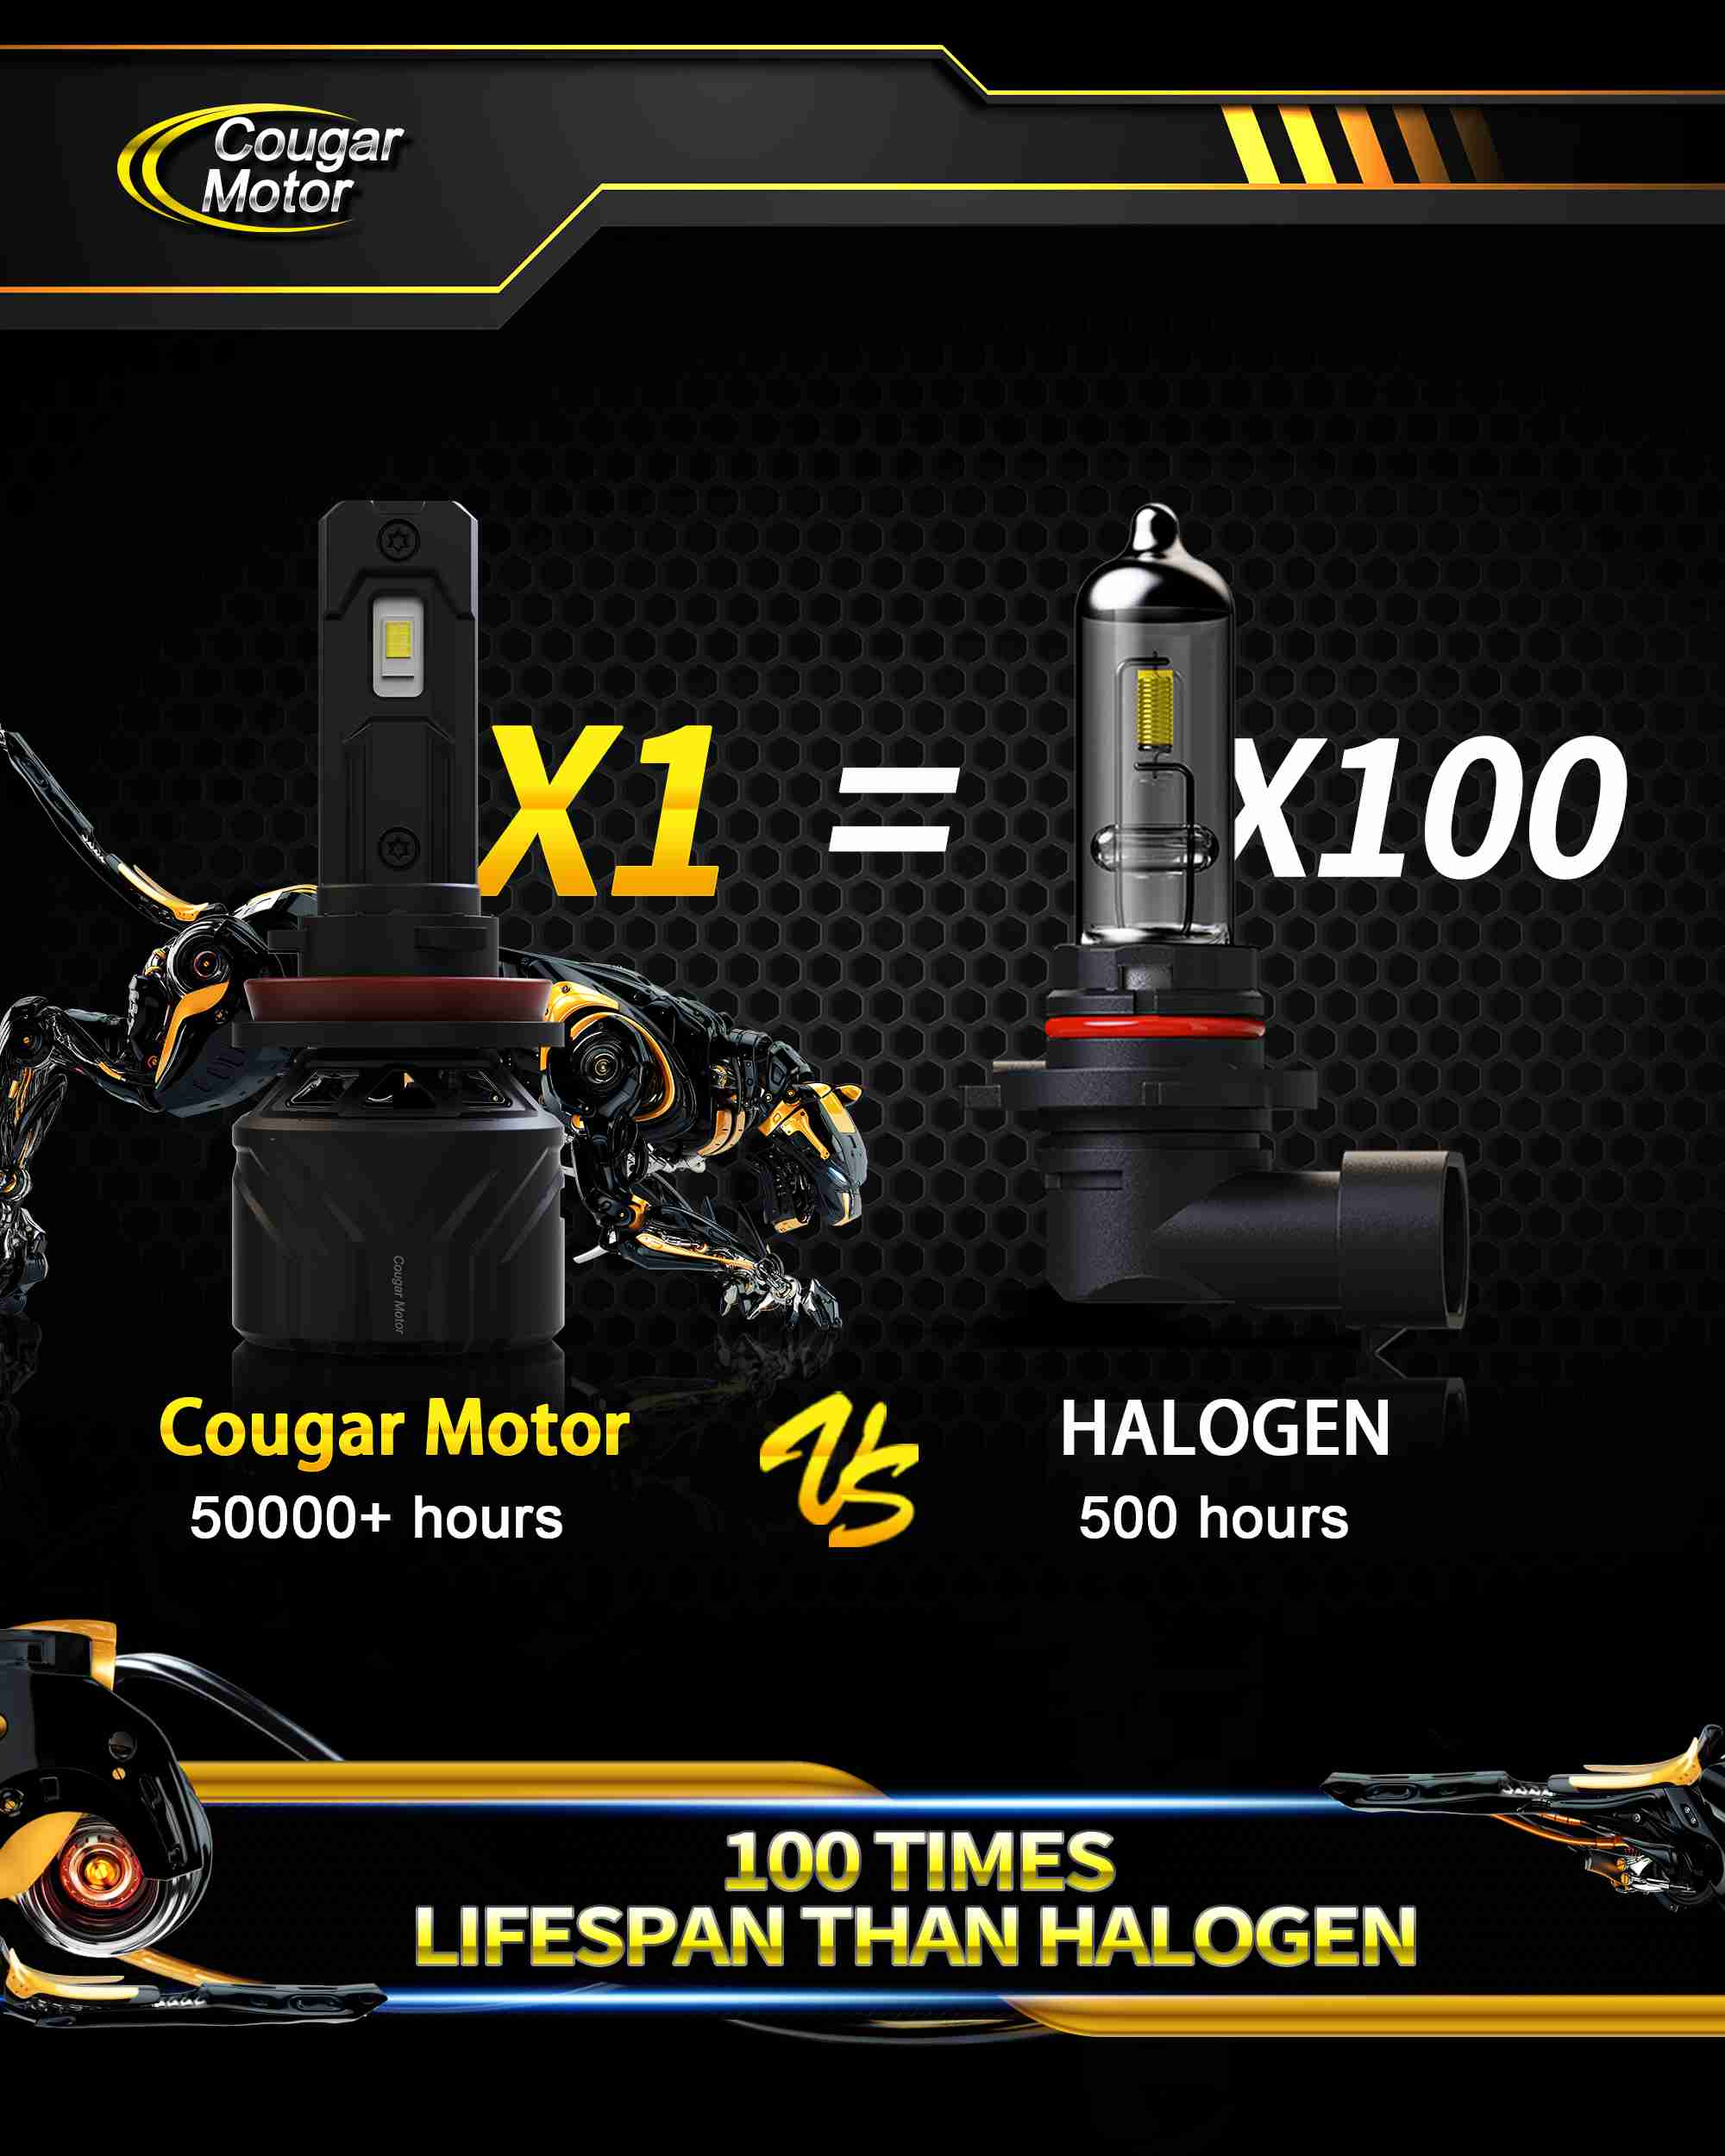 Cougar Motor H11 LED Bulb, H8 H9 18000LM 80W Mute 400% Brighter 6500K Cool  White Halogen Replacement - Cougar Motor - LED & HID Lighting for Cars,  Trucks & Motorcycles